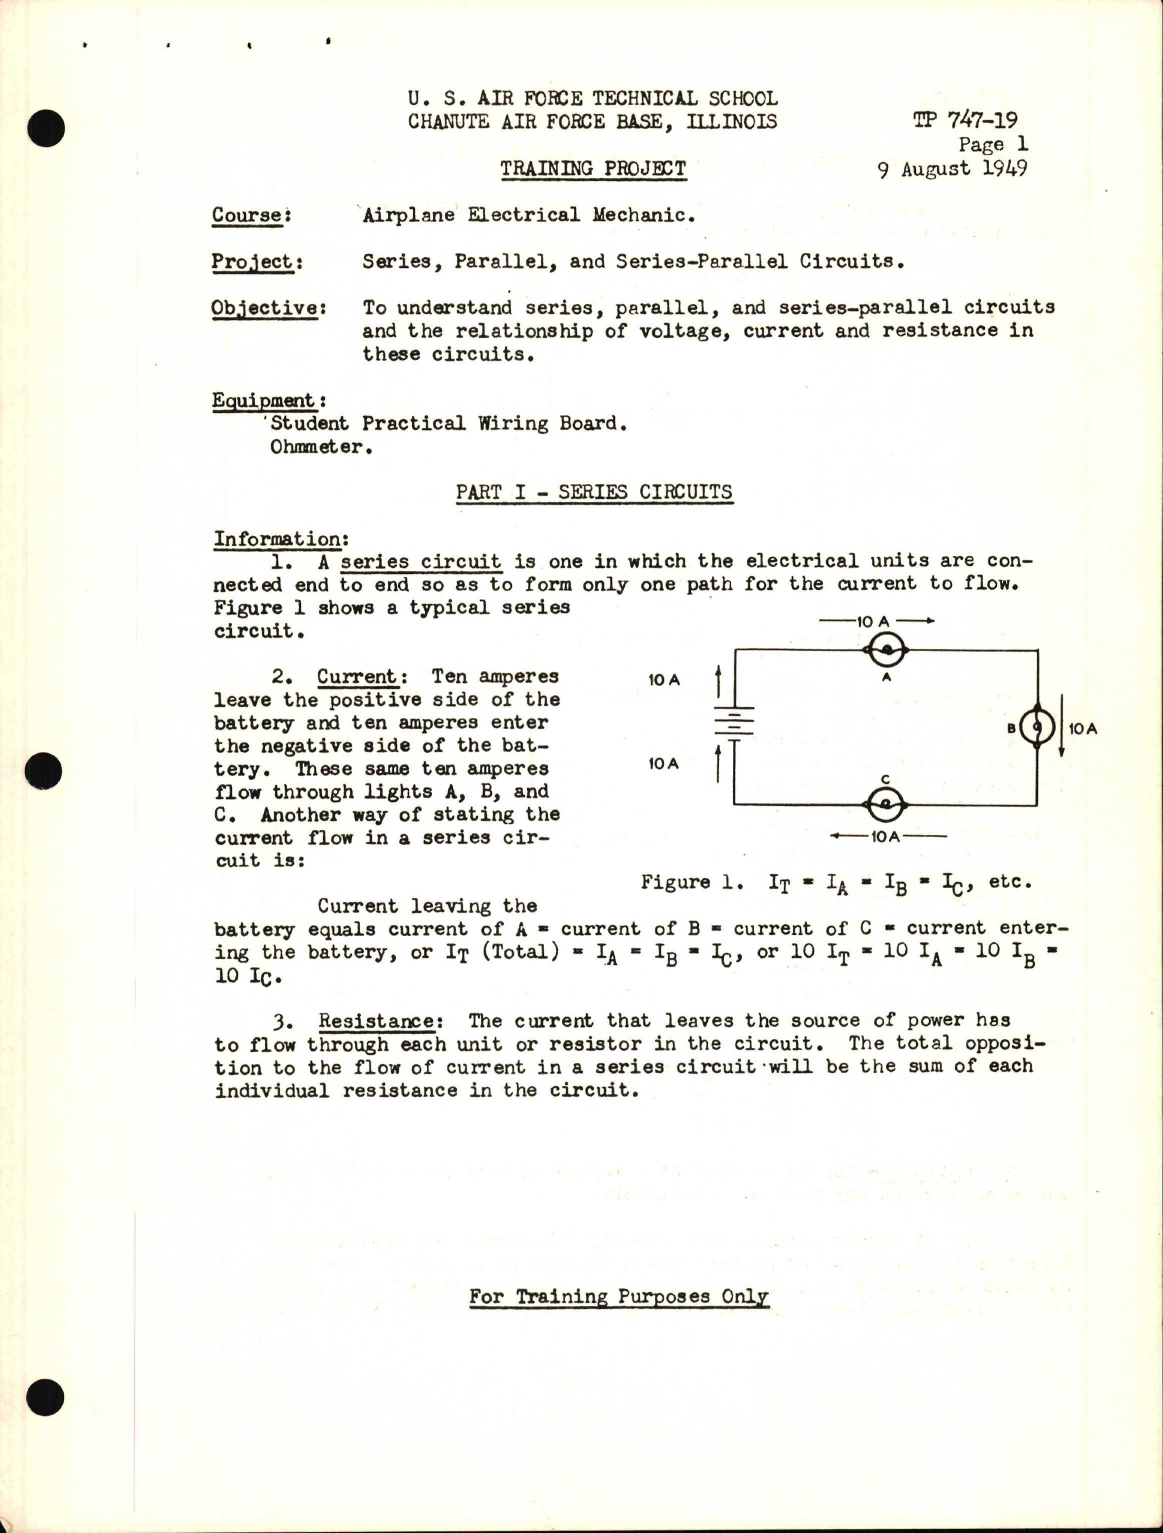 Sample page 1 from AirCorps Library document: Training Project, Series, Parallel, and Series-Parallel Circuits